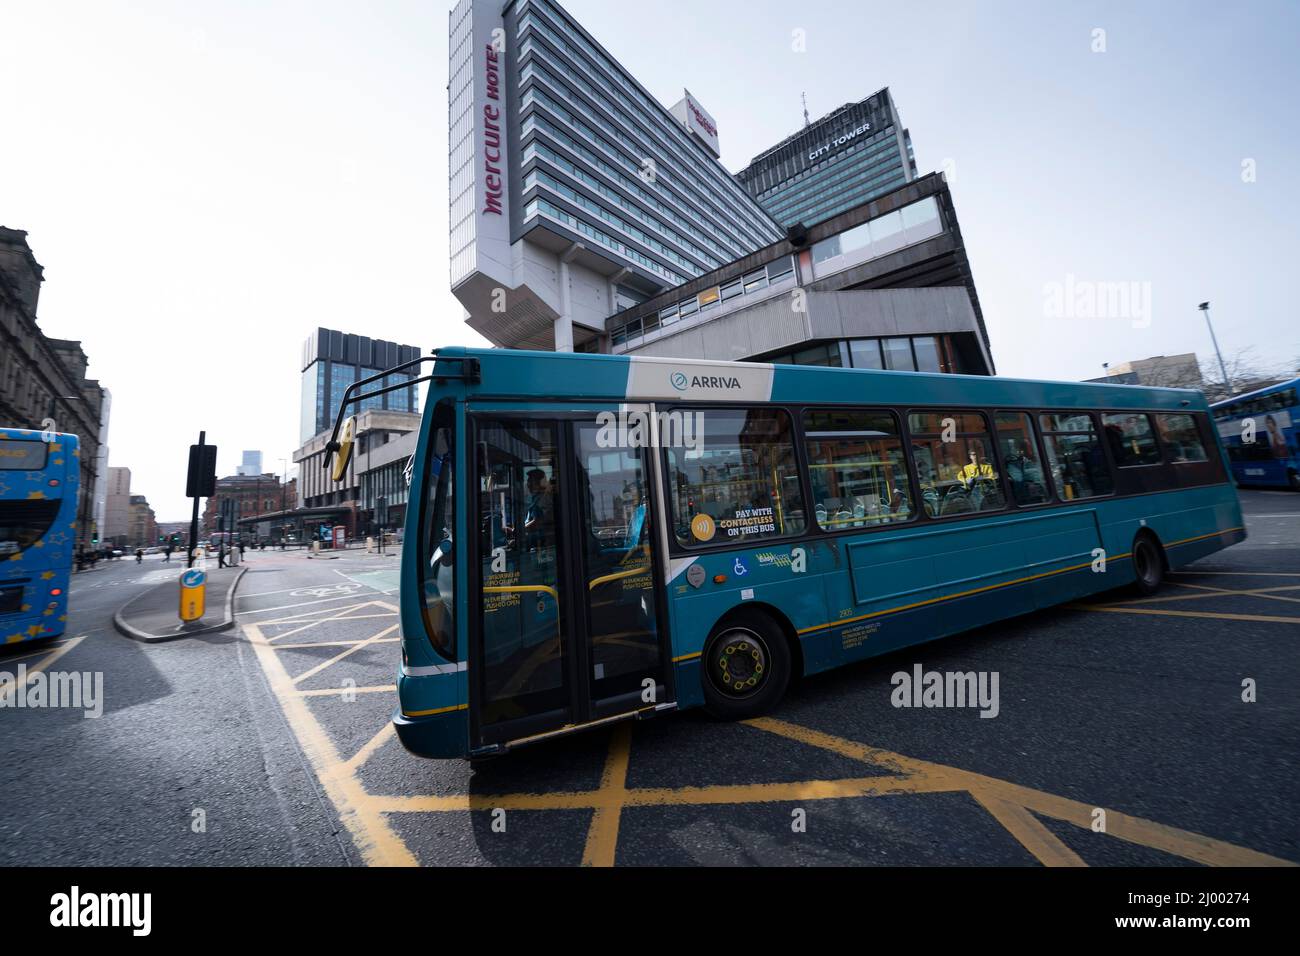 Manchester, UK, 15th March 2022. Buses are seen at Piccadilly Bus Station in central Manchester as it was announced that bus tickets in Greater Manchester will be capped at £2 for adults and £1 for children under plans for a “London-style transport revolution” Manchester, UK. Credit: Jon Super/Alamy Live News. Stock Photo